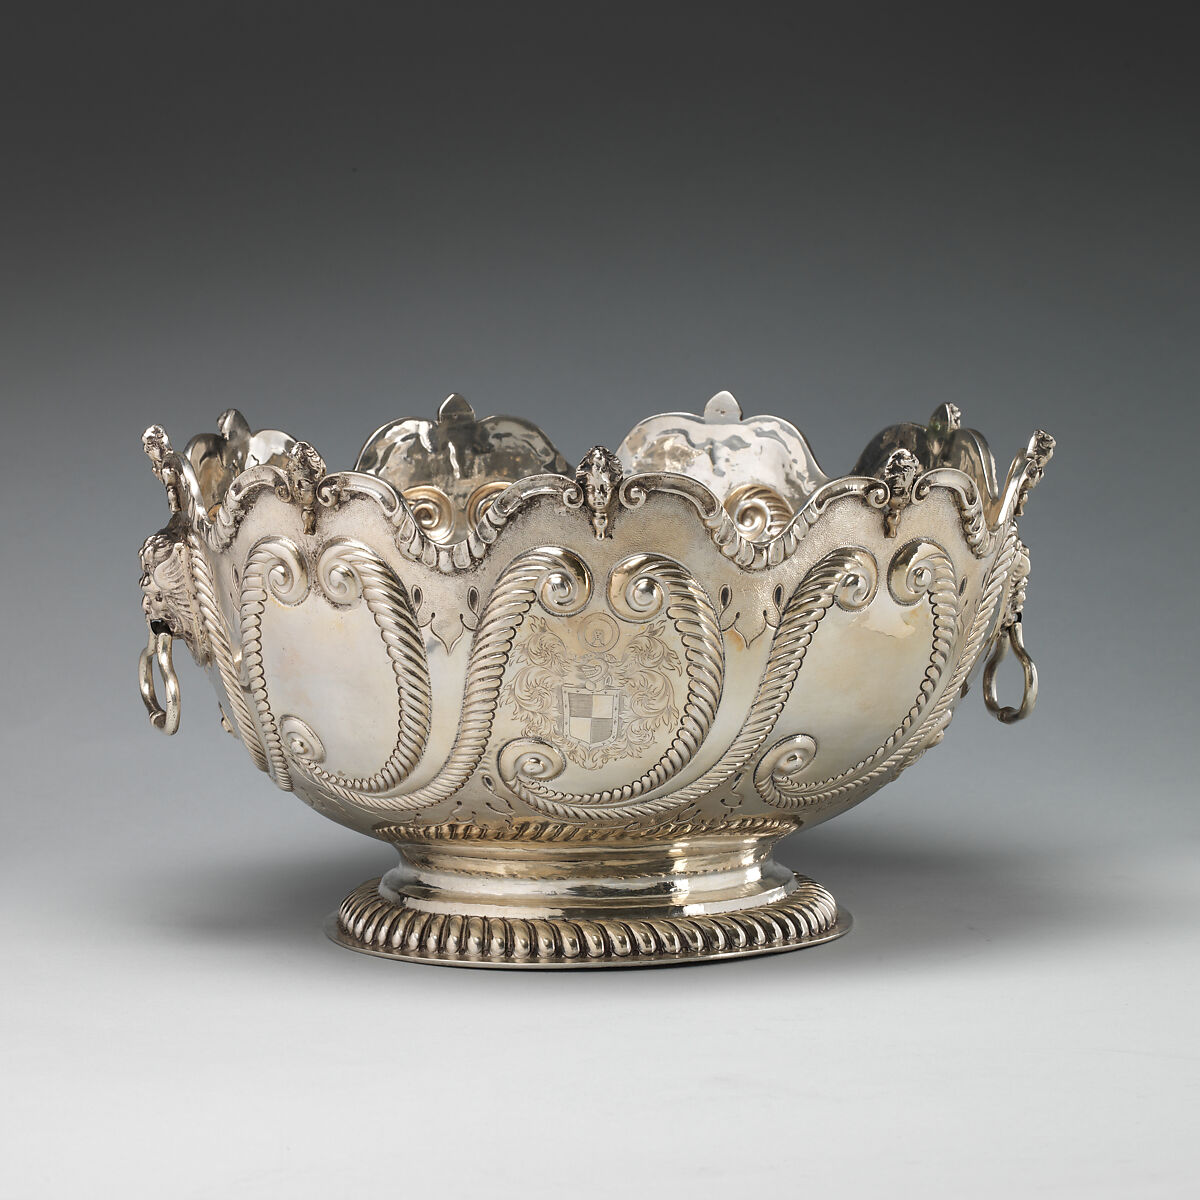 Monteith, Charles Overing (active after 1692), Silver, British, London 